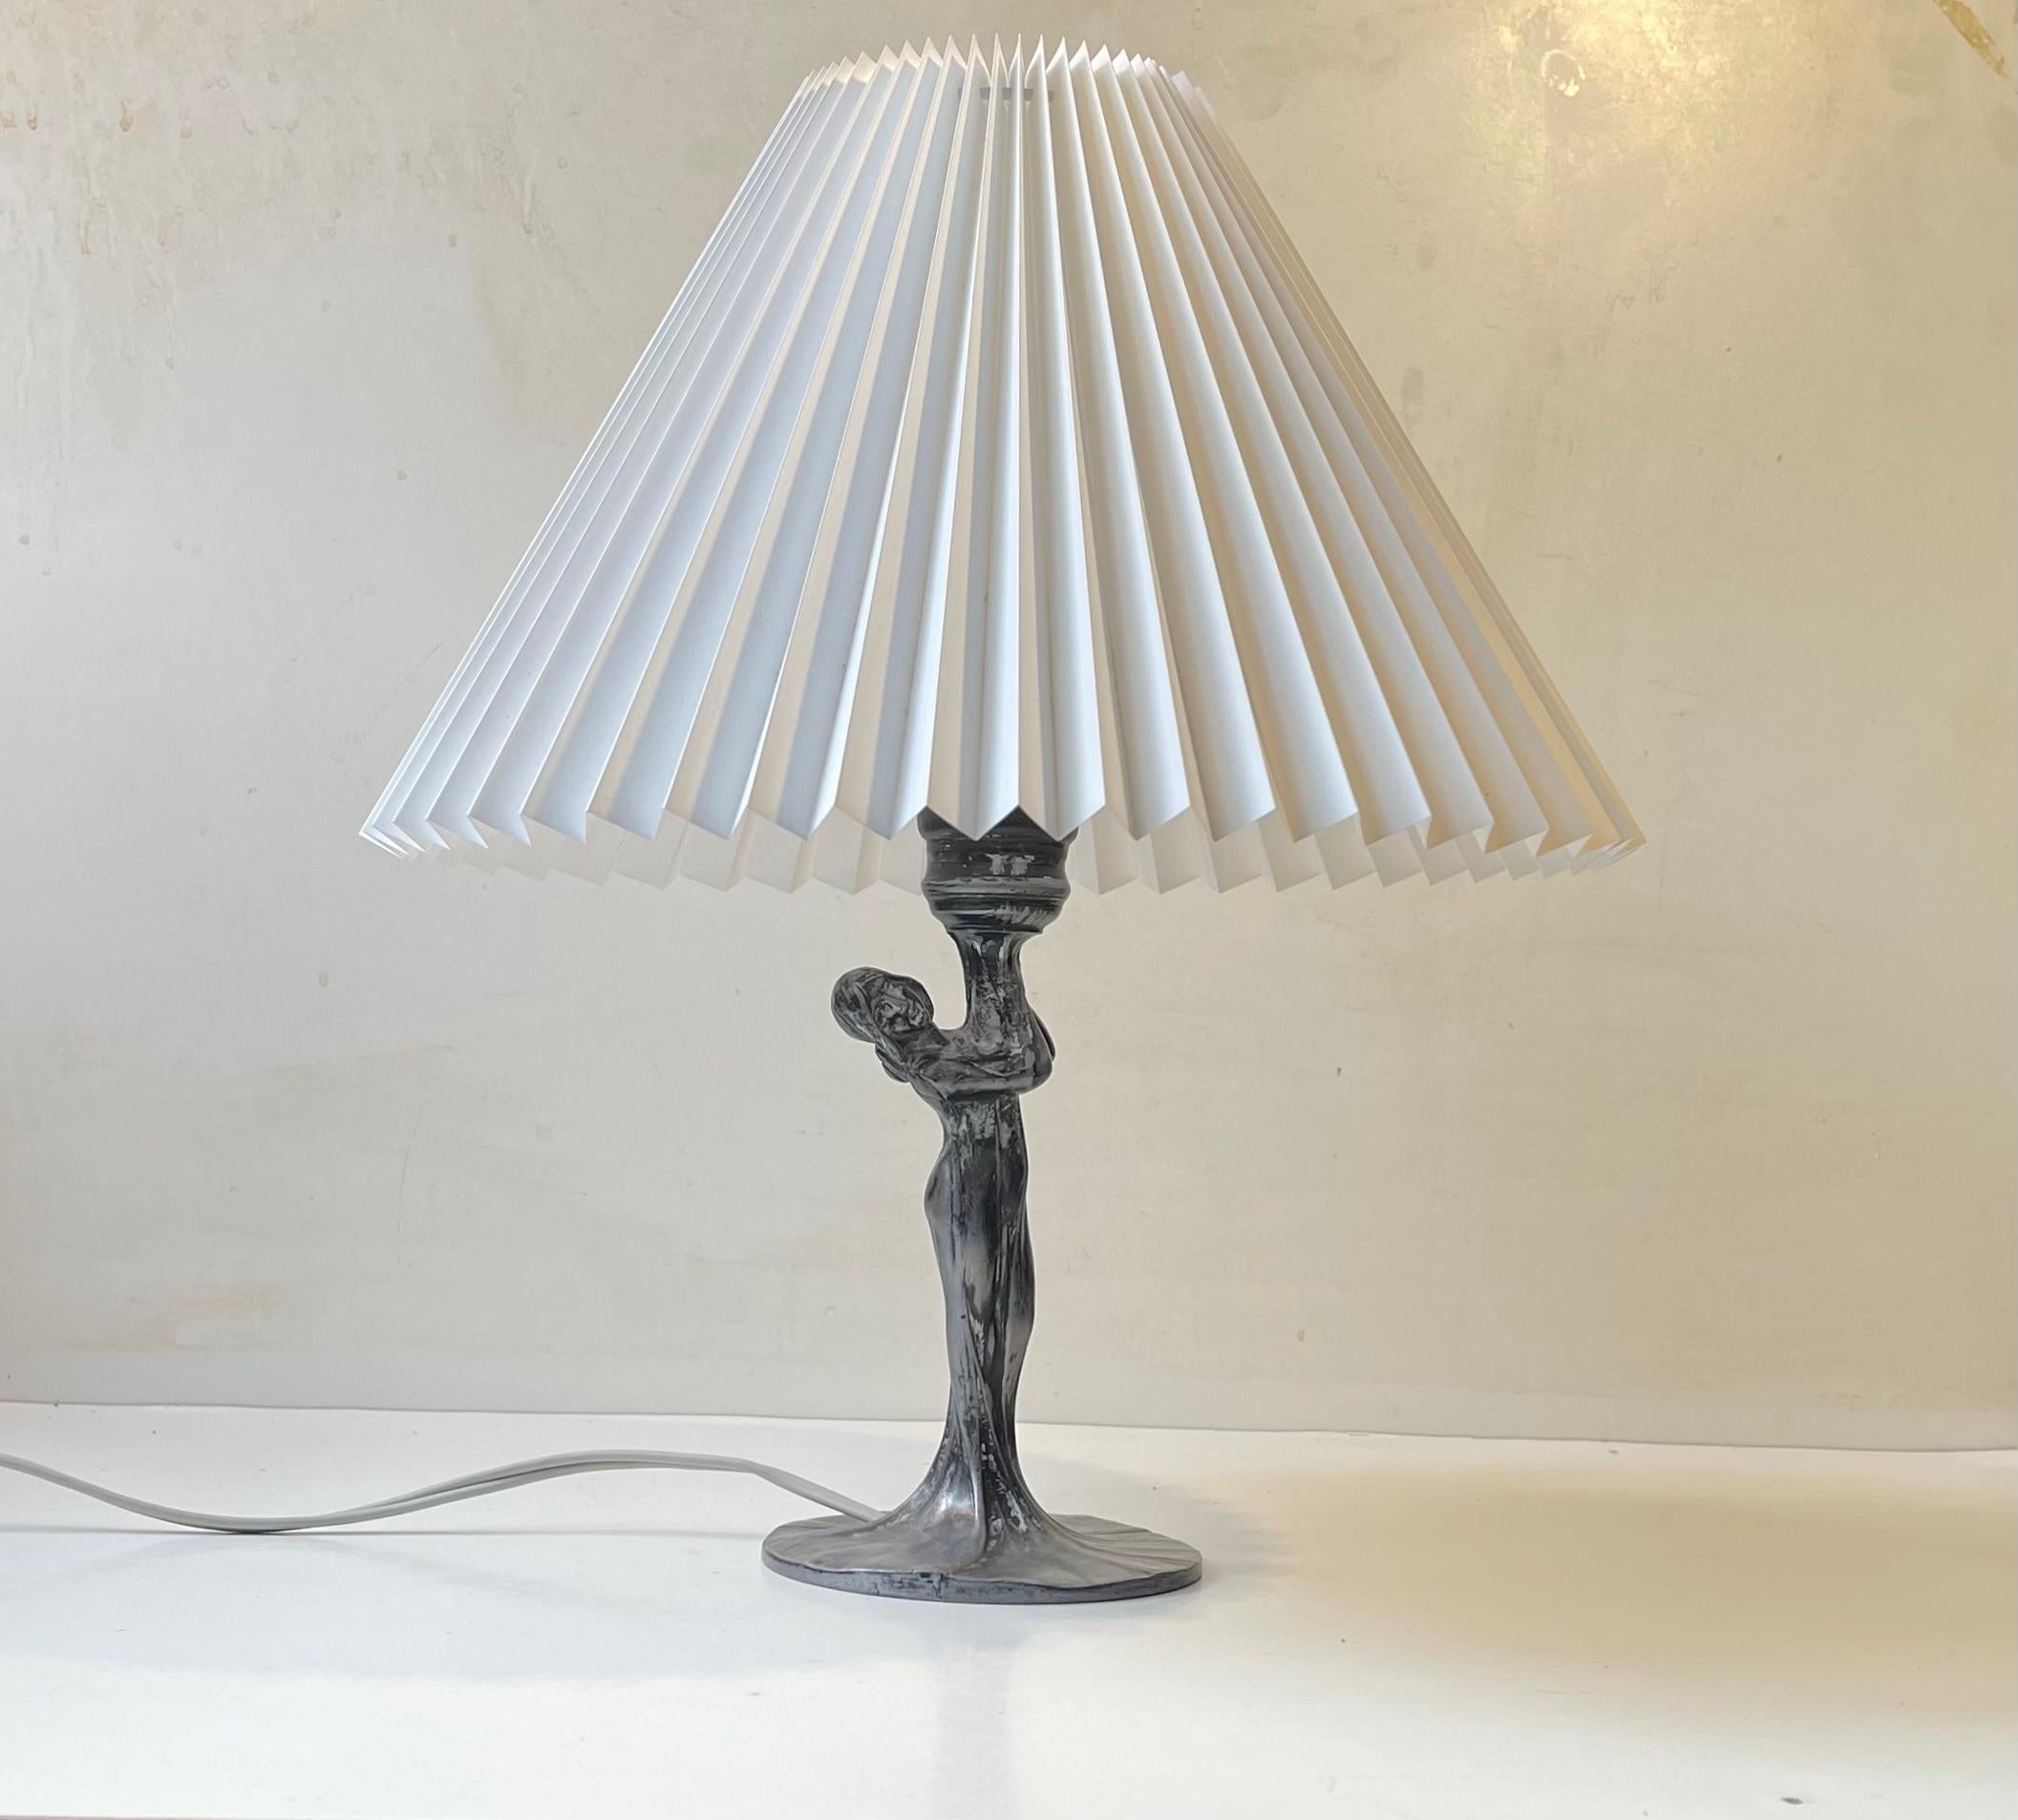 I the style of Max Le Verrier and Leonardine comes this stylized table lamp in patinated pewter. It depicts a woman whos dress floats down and creates the base. It was made in France circa 1920-40. It comes mounted with a new fluted white shade.